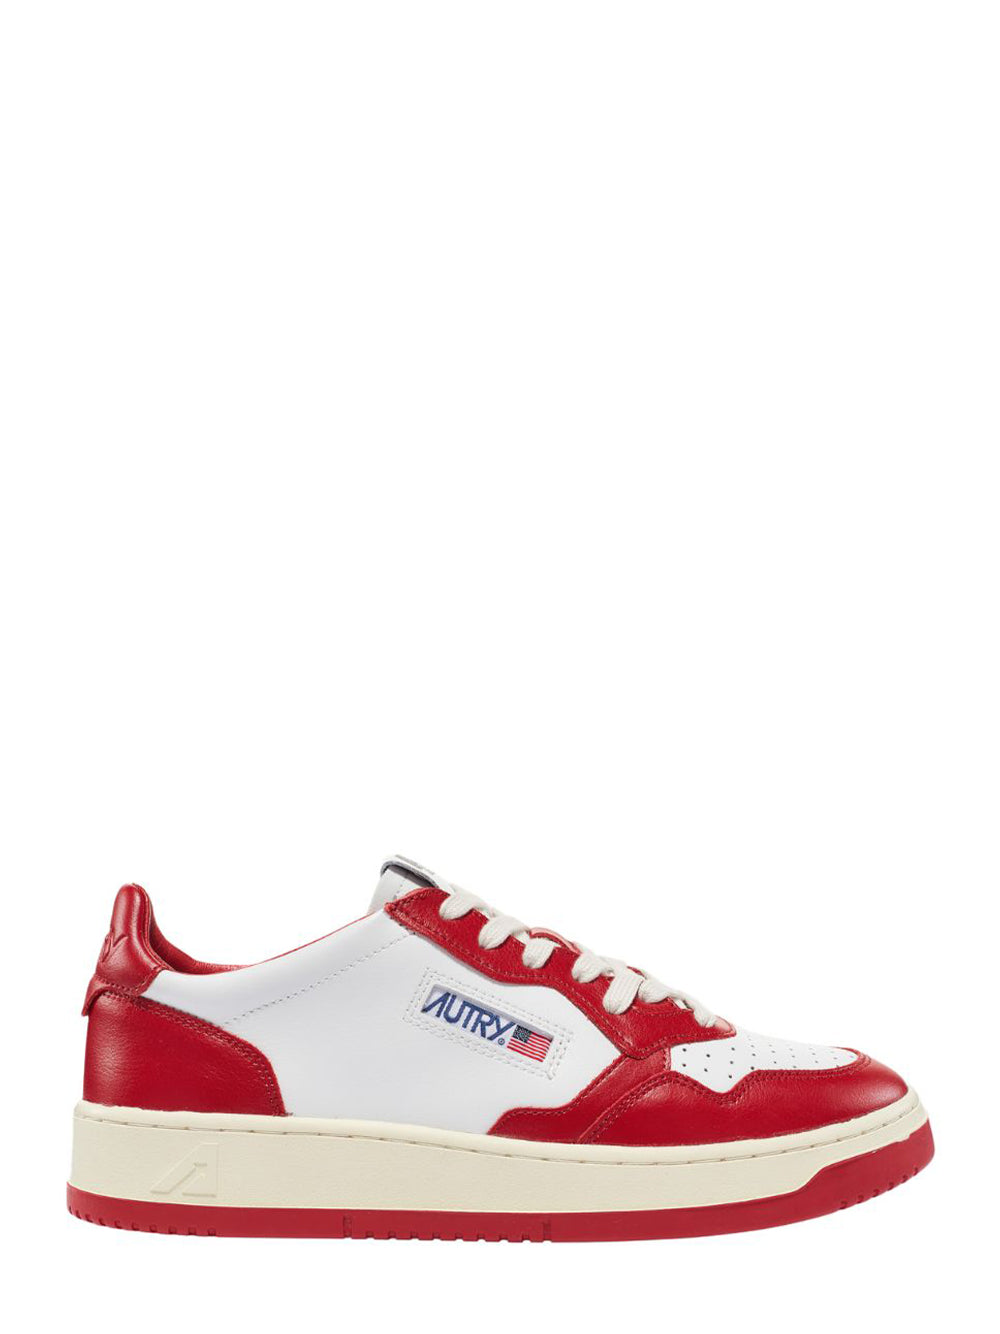 Medalist Low Sneakers In Two-Tone Leather Color (White And Red) (Men)